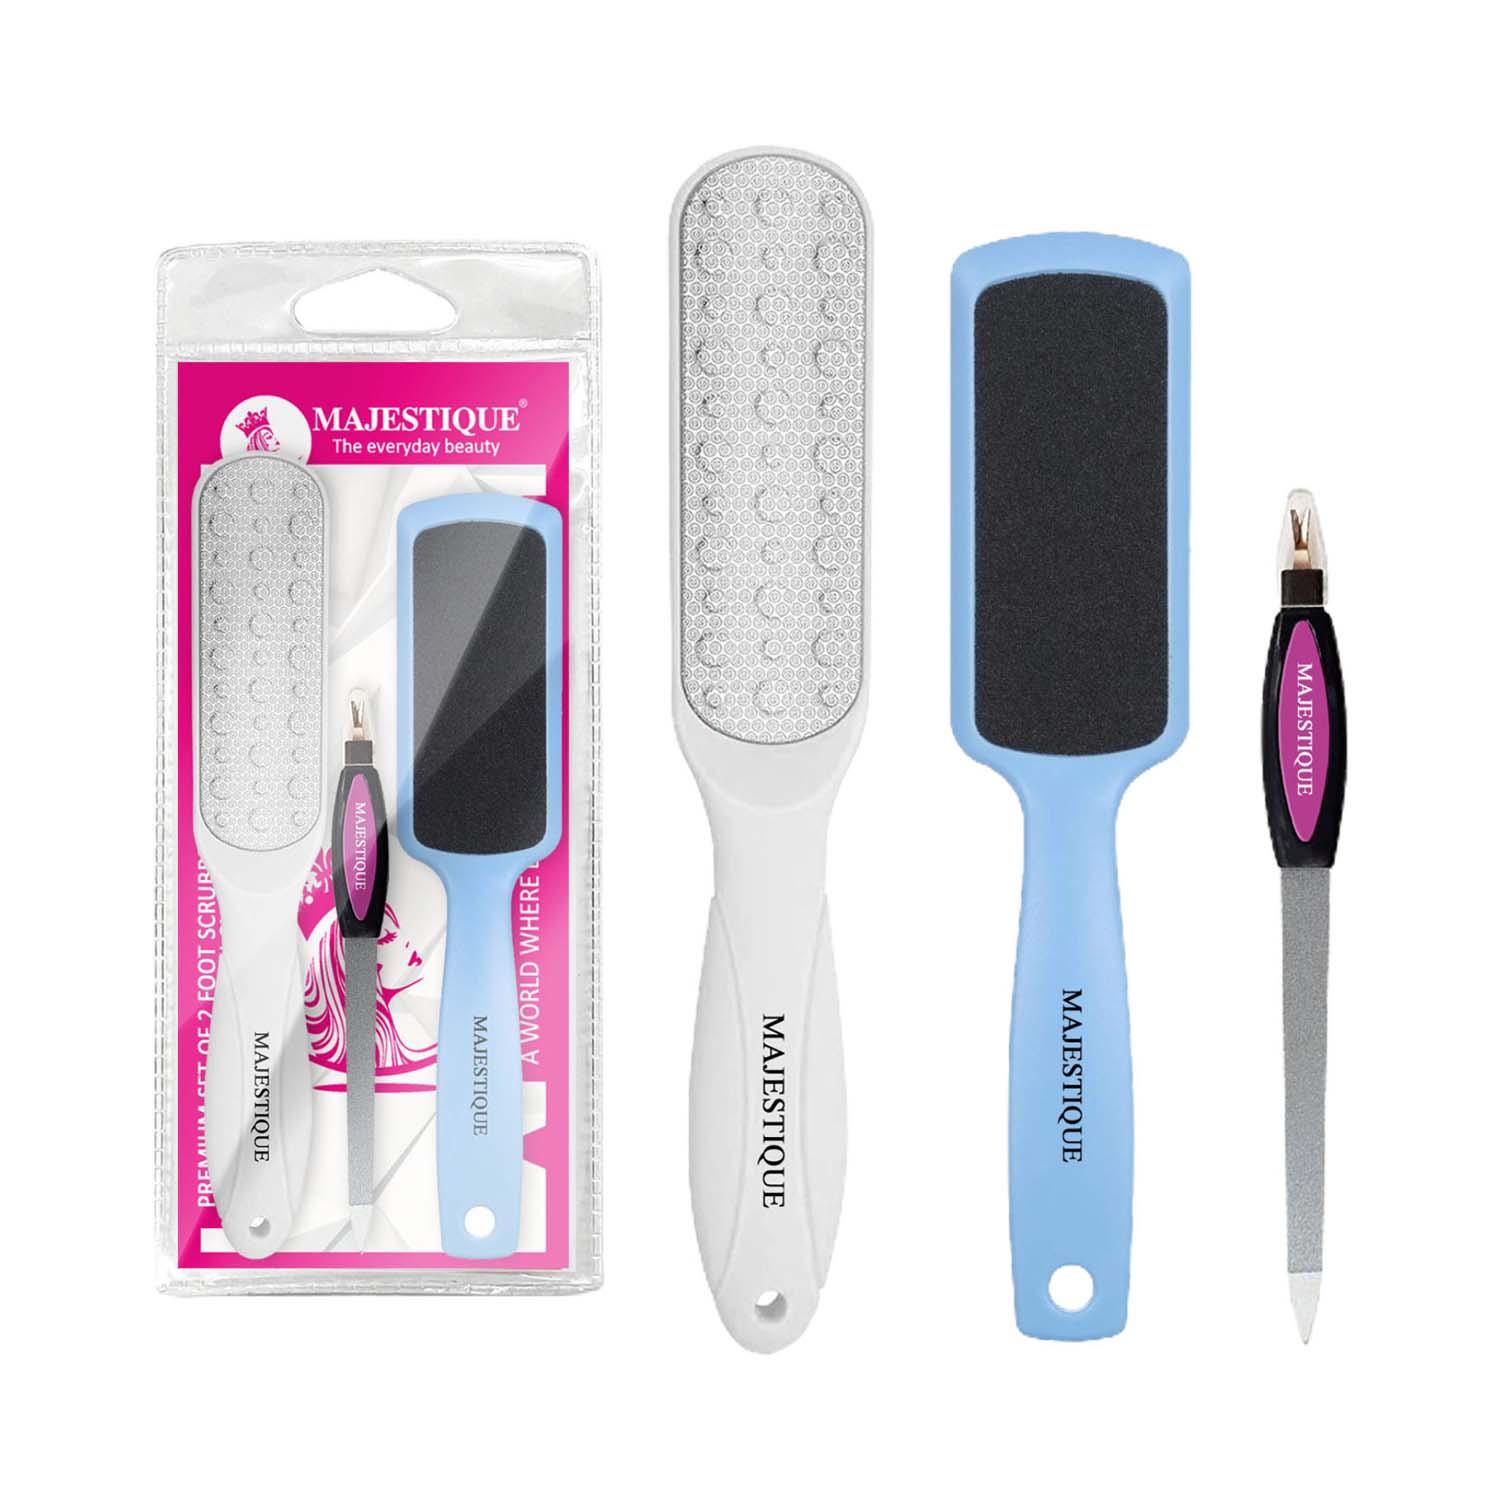 Majestique | Majestique Large Double Sided Foot Scrubber Set with Nail Filer (3 pcs)